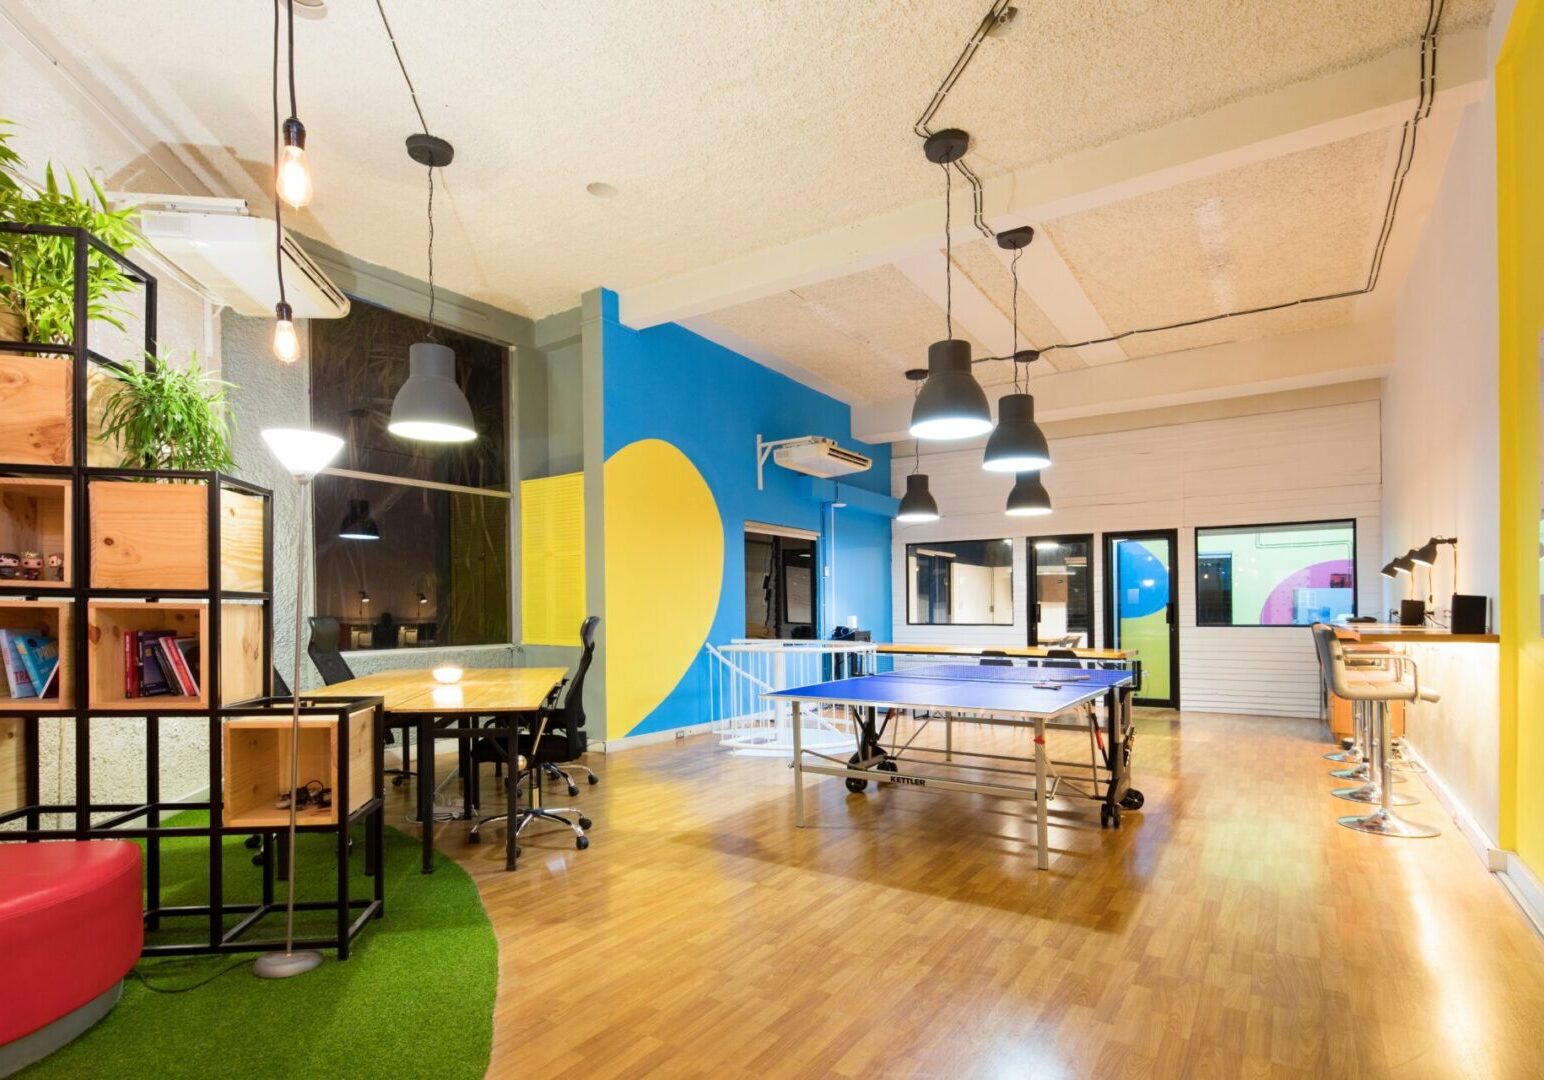 An office with ping pong tables and colorful walls.